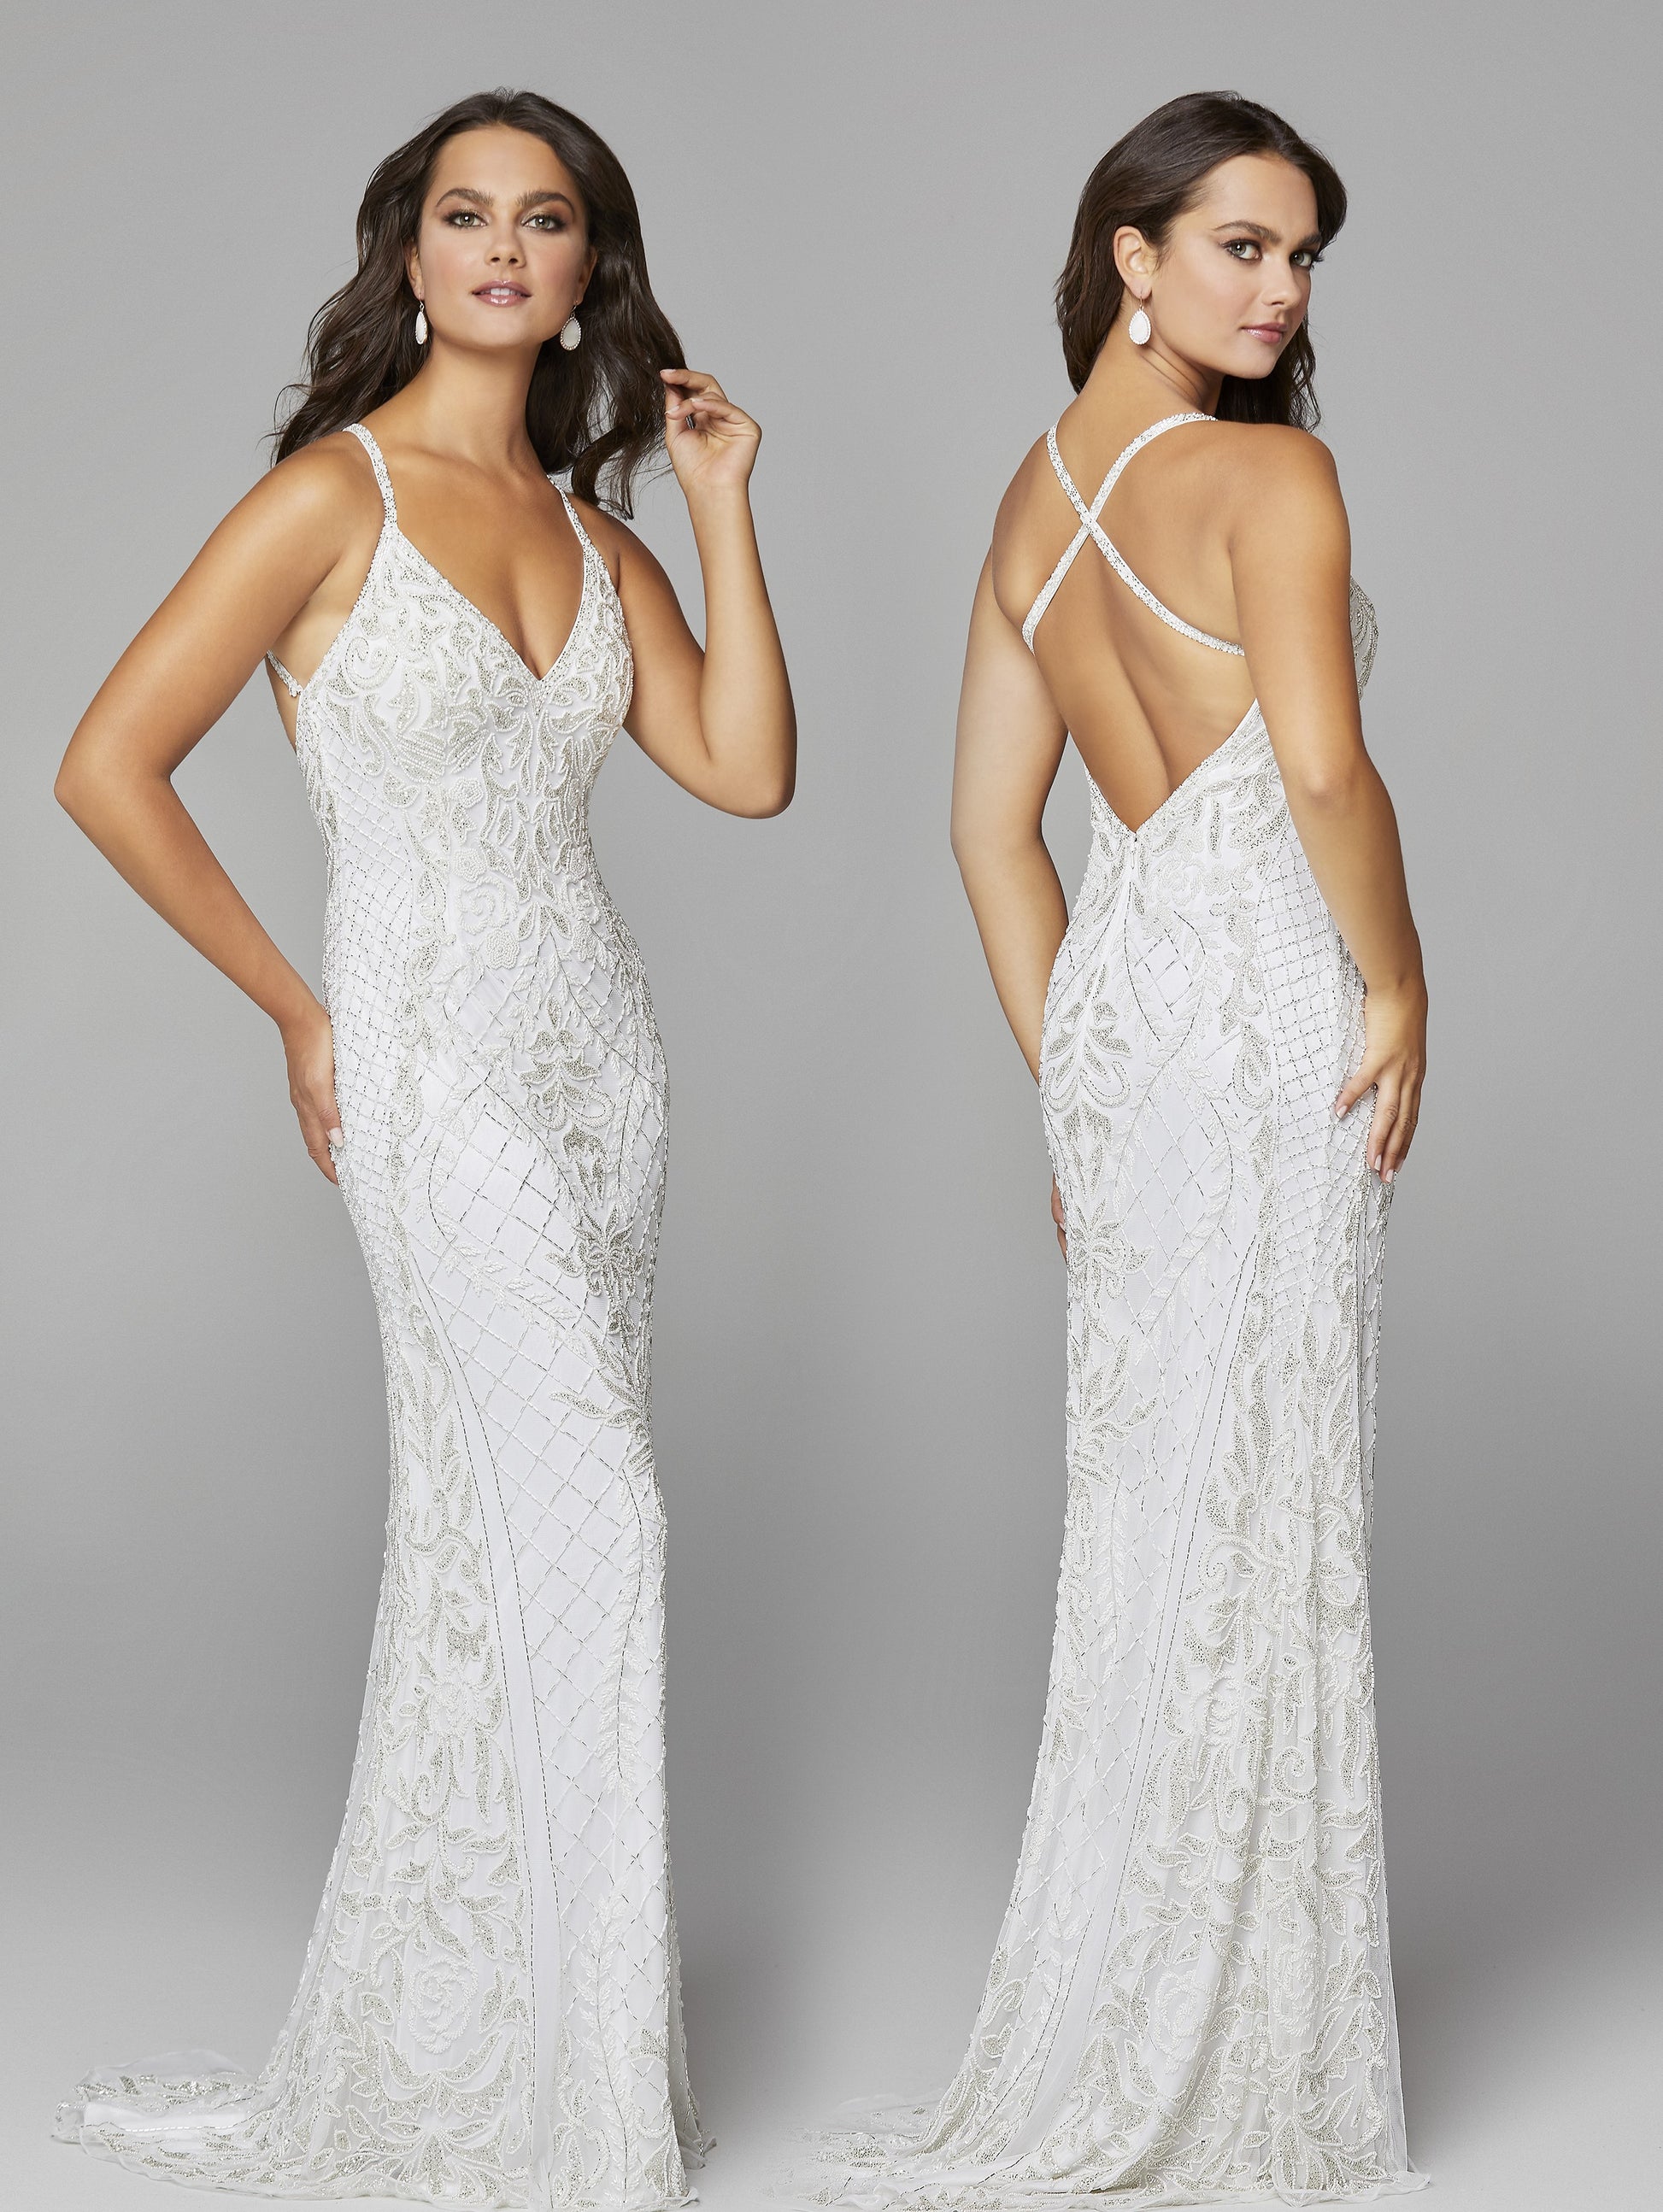 Primavera Couture 3428 is a beaded Prom Dress, Pageant Gown, Wedding Dress & Formal Evening Wear gown. This Gown Features a v neckline with spaghetti straps that criss cross in the open back full long sequin and bead skirt.   Available colors:  Ivory  Available sizes:  8, 12